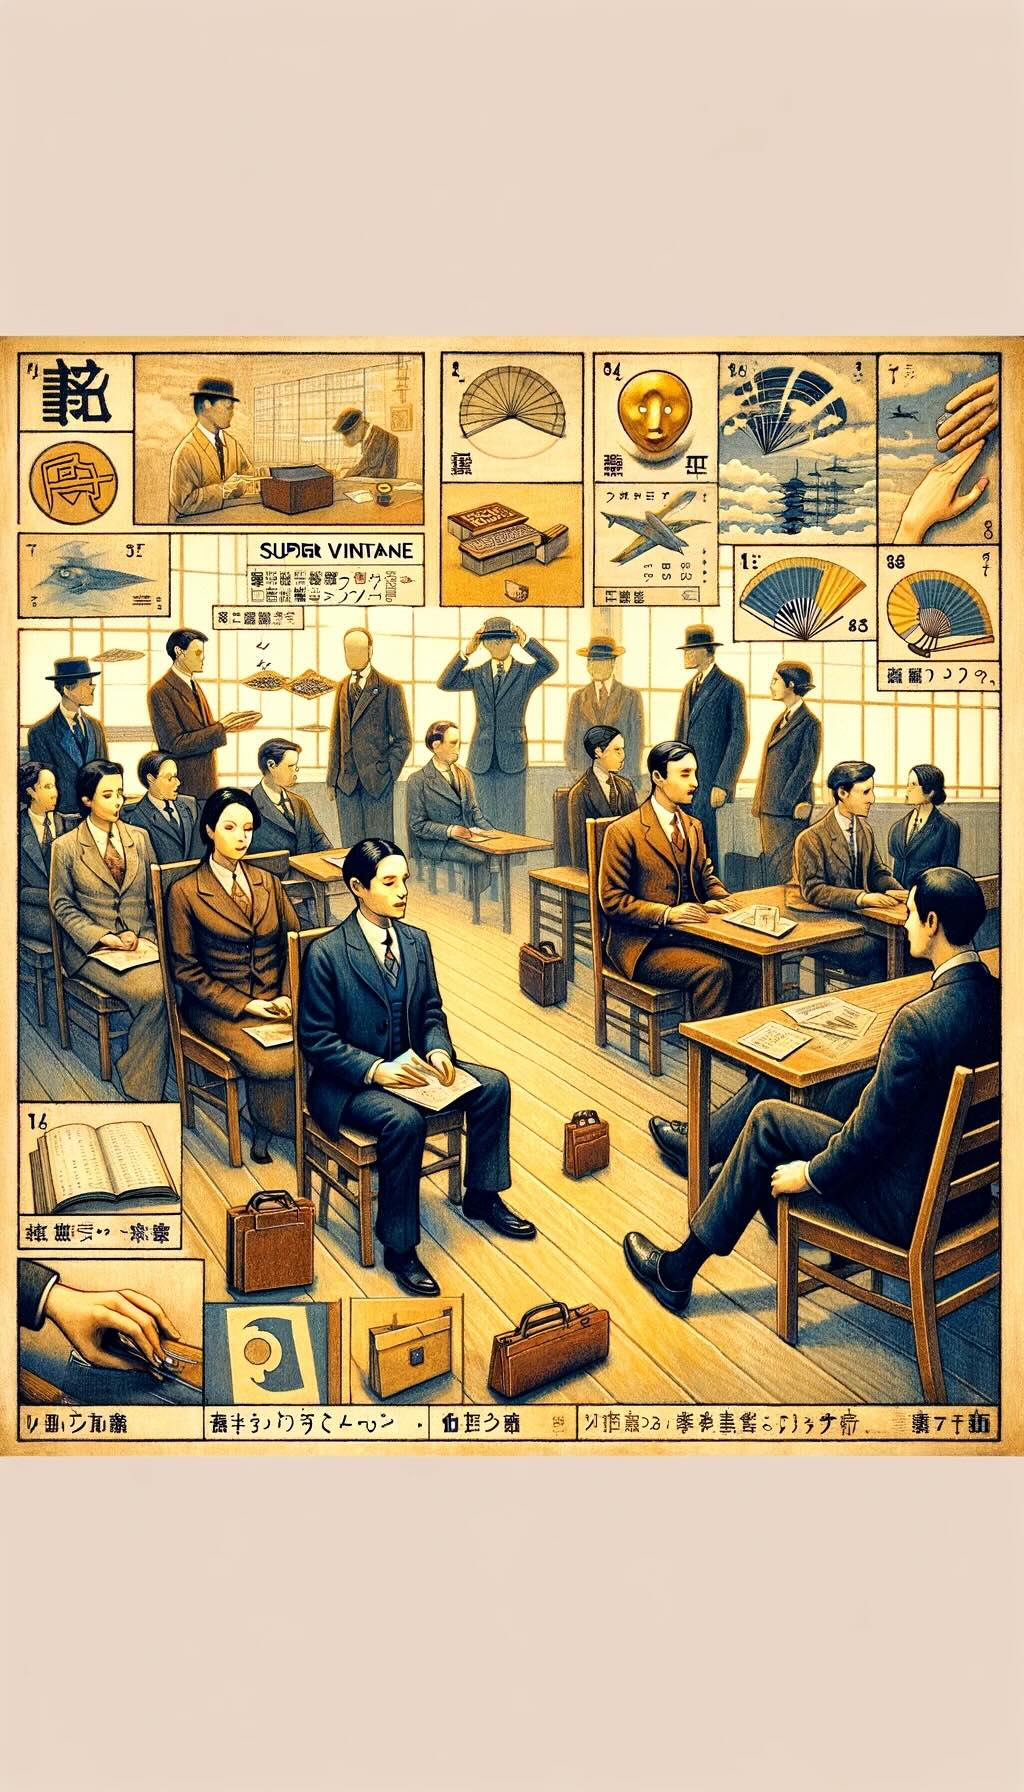 Understanding and adapting to unspoken rules in Japanese society illustrates 'Kuuki wo yomu' (reading the atmosphere), with individuals in various settings like business meetings or social gatherings, subtly picking up on non-verbal cues showcases the role of non-verbal communication, such as facial expressions, body language, and the strategic use of silence, and includes elements of gestures and etiquette like the respectful exchange of business cards and bowing. It conveys the intricacies of social interactions in Japan, emphasizing the significance of sensitivity to context, group dynamics, and the art of listening.